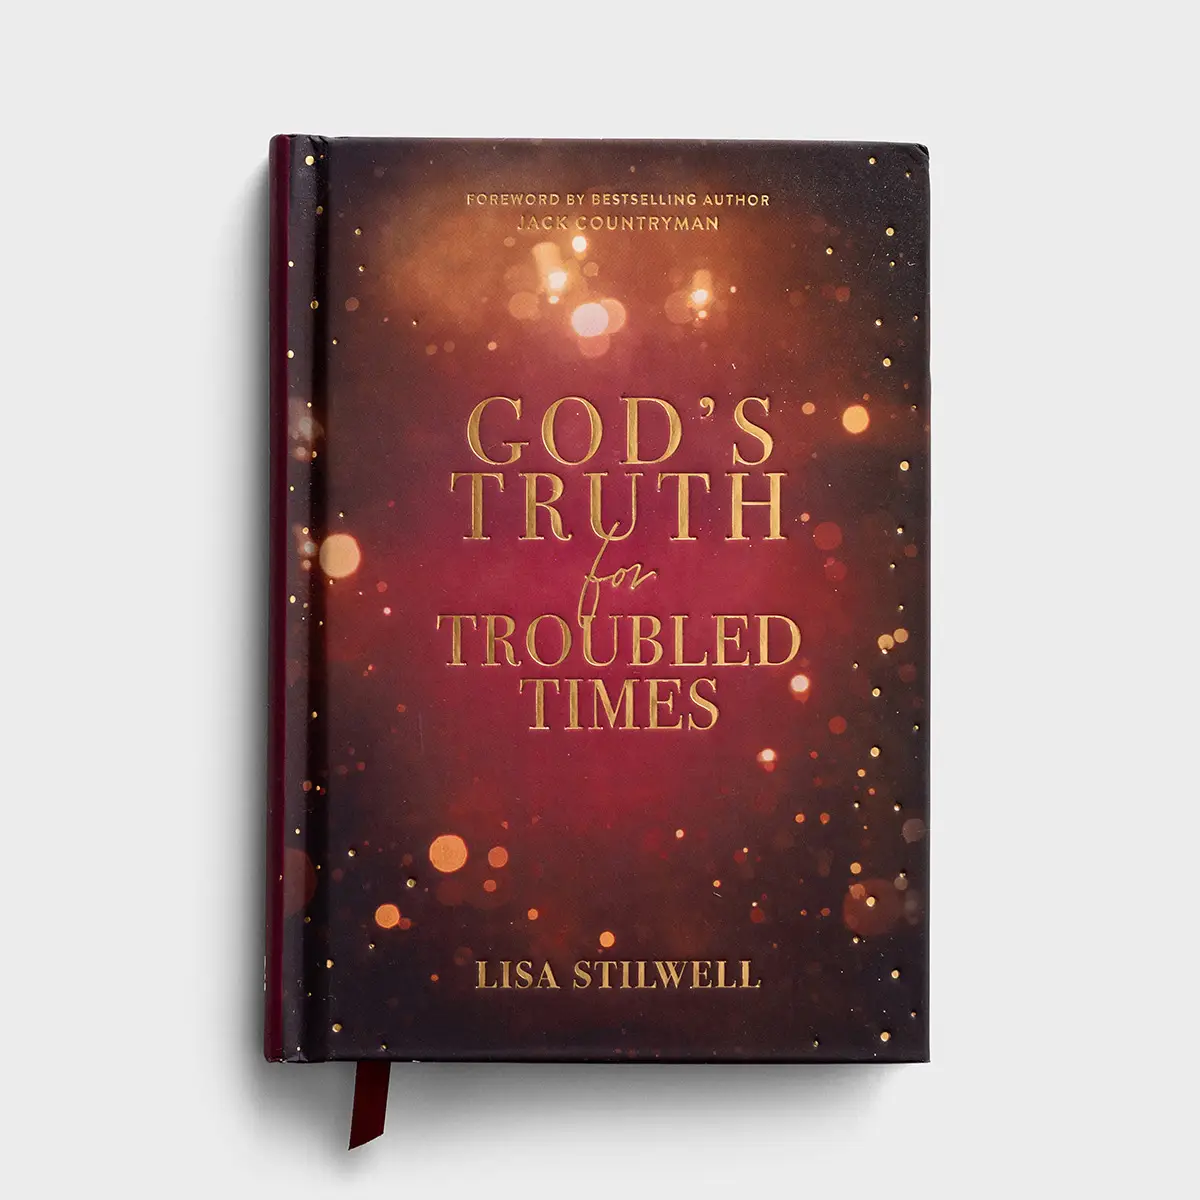 God's Truth for Troubled Times (hardcover)